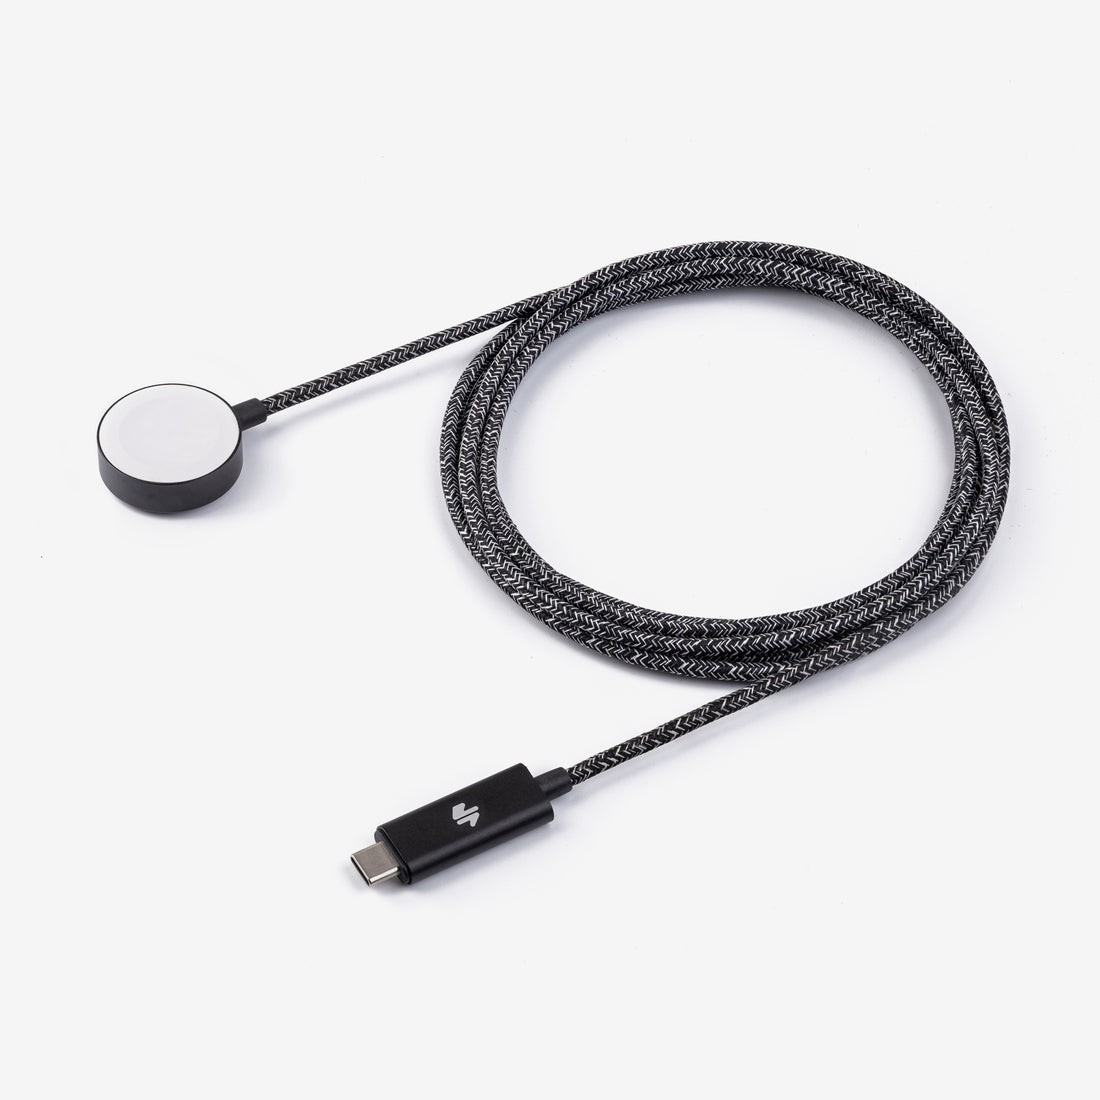 Apple Watch Charging Cable – Ampere